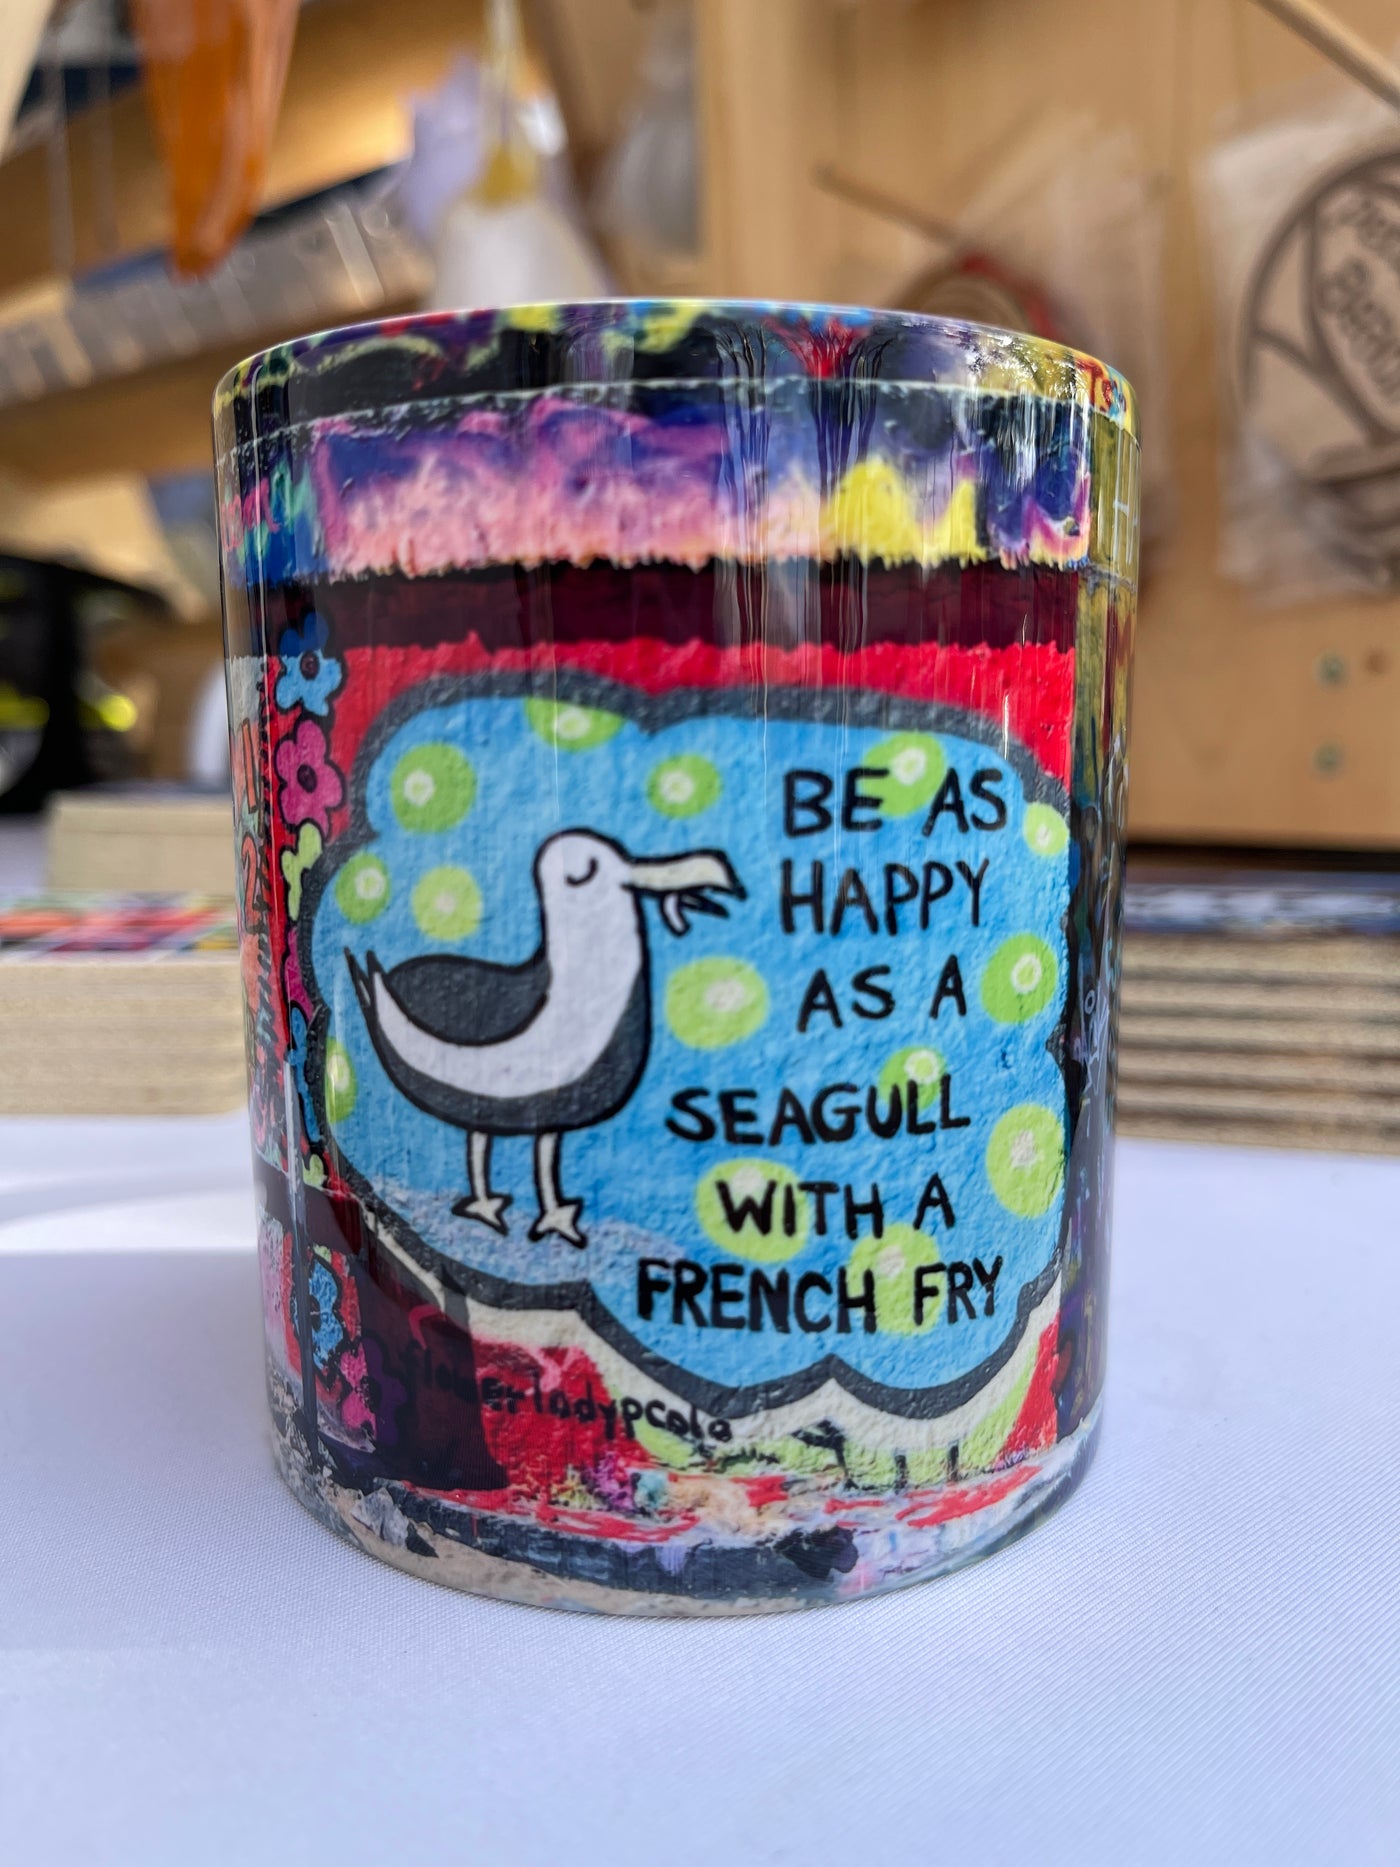 Be as happy as a seagull with a french fry - Mug